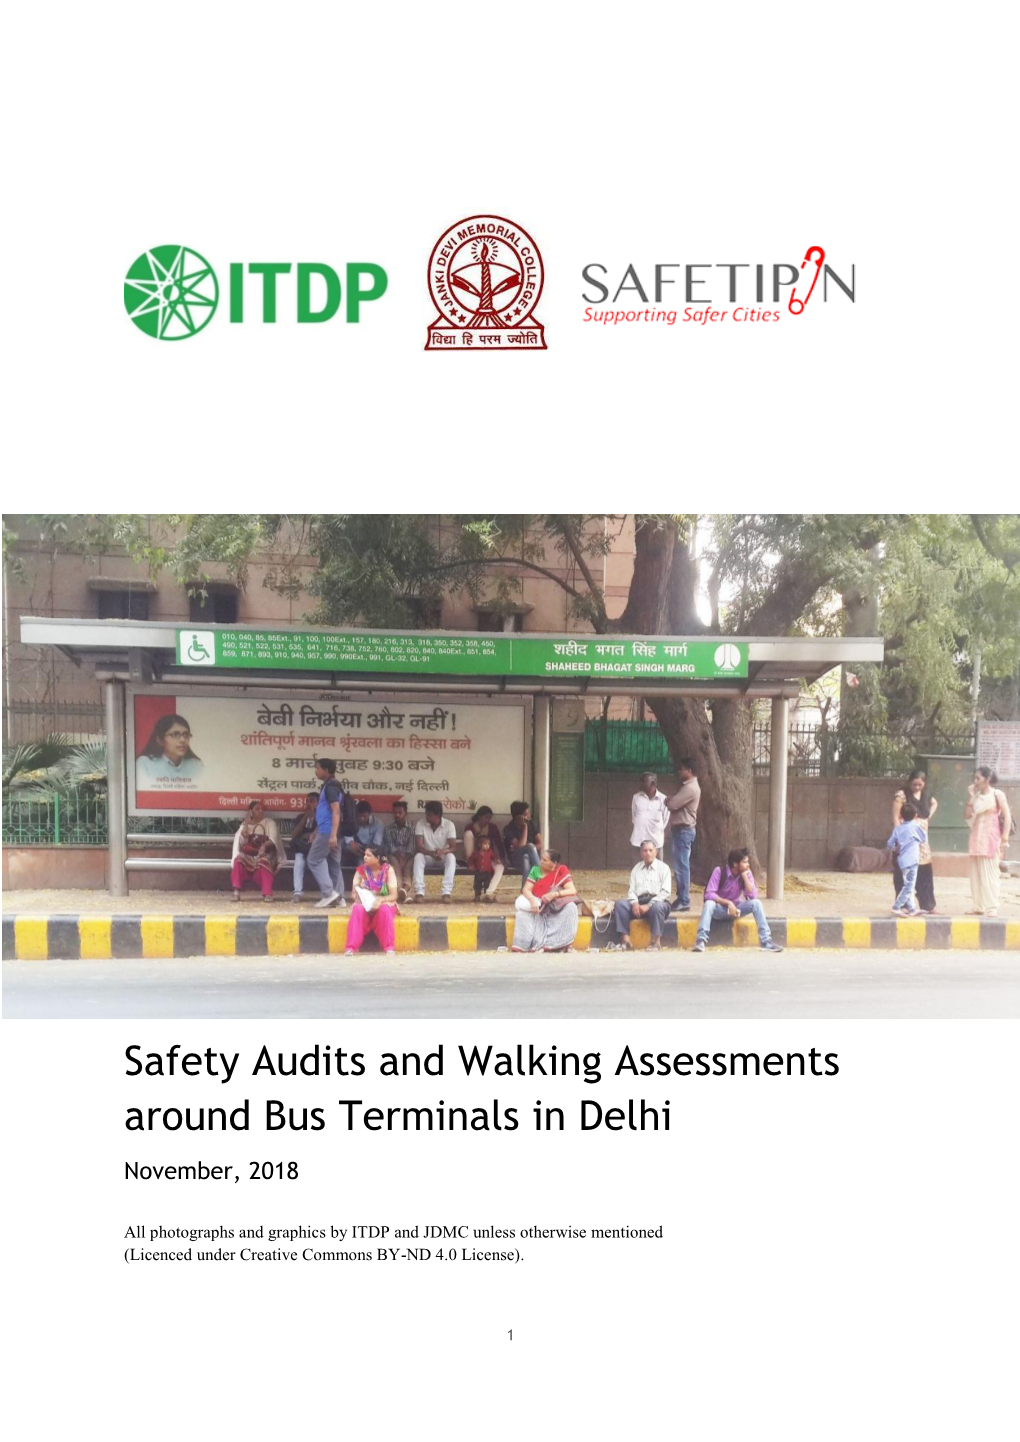 Safety Audits and Walking Assessments Around Bus Terminals in Delhi November, 2018